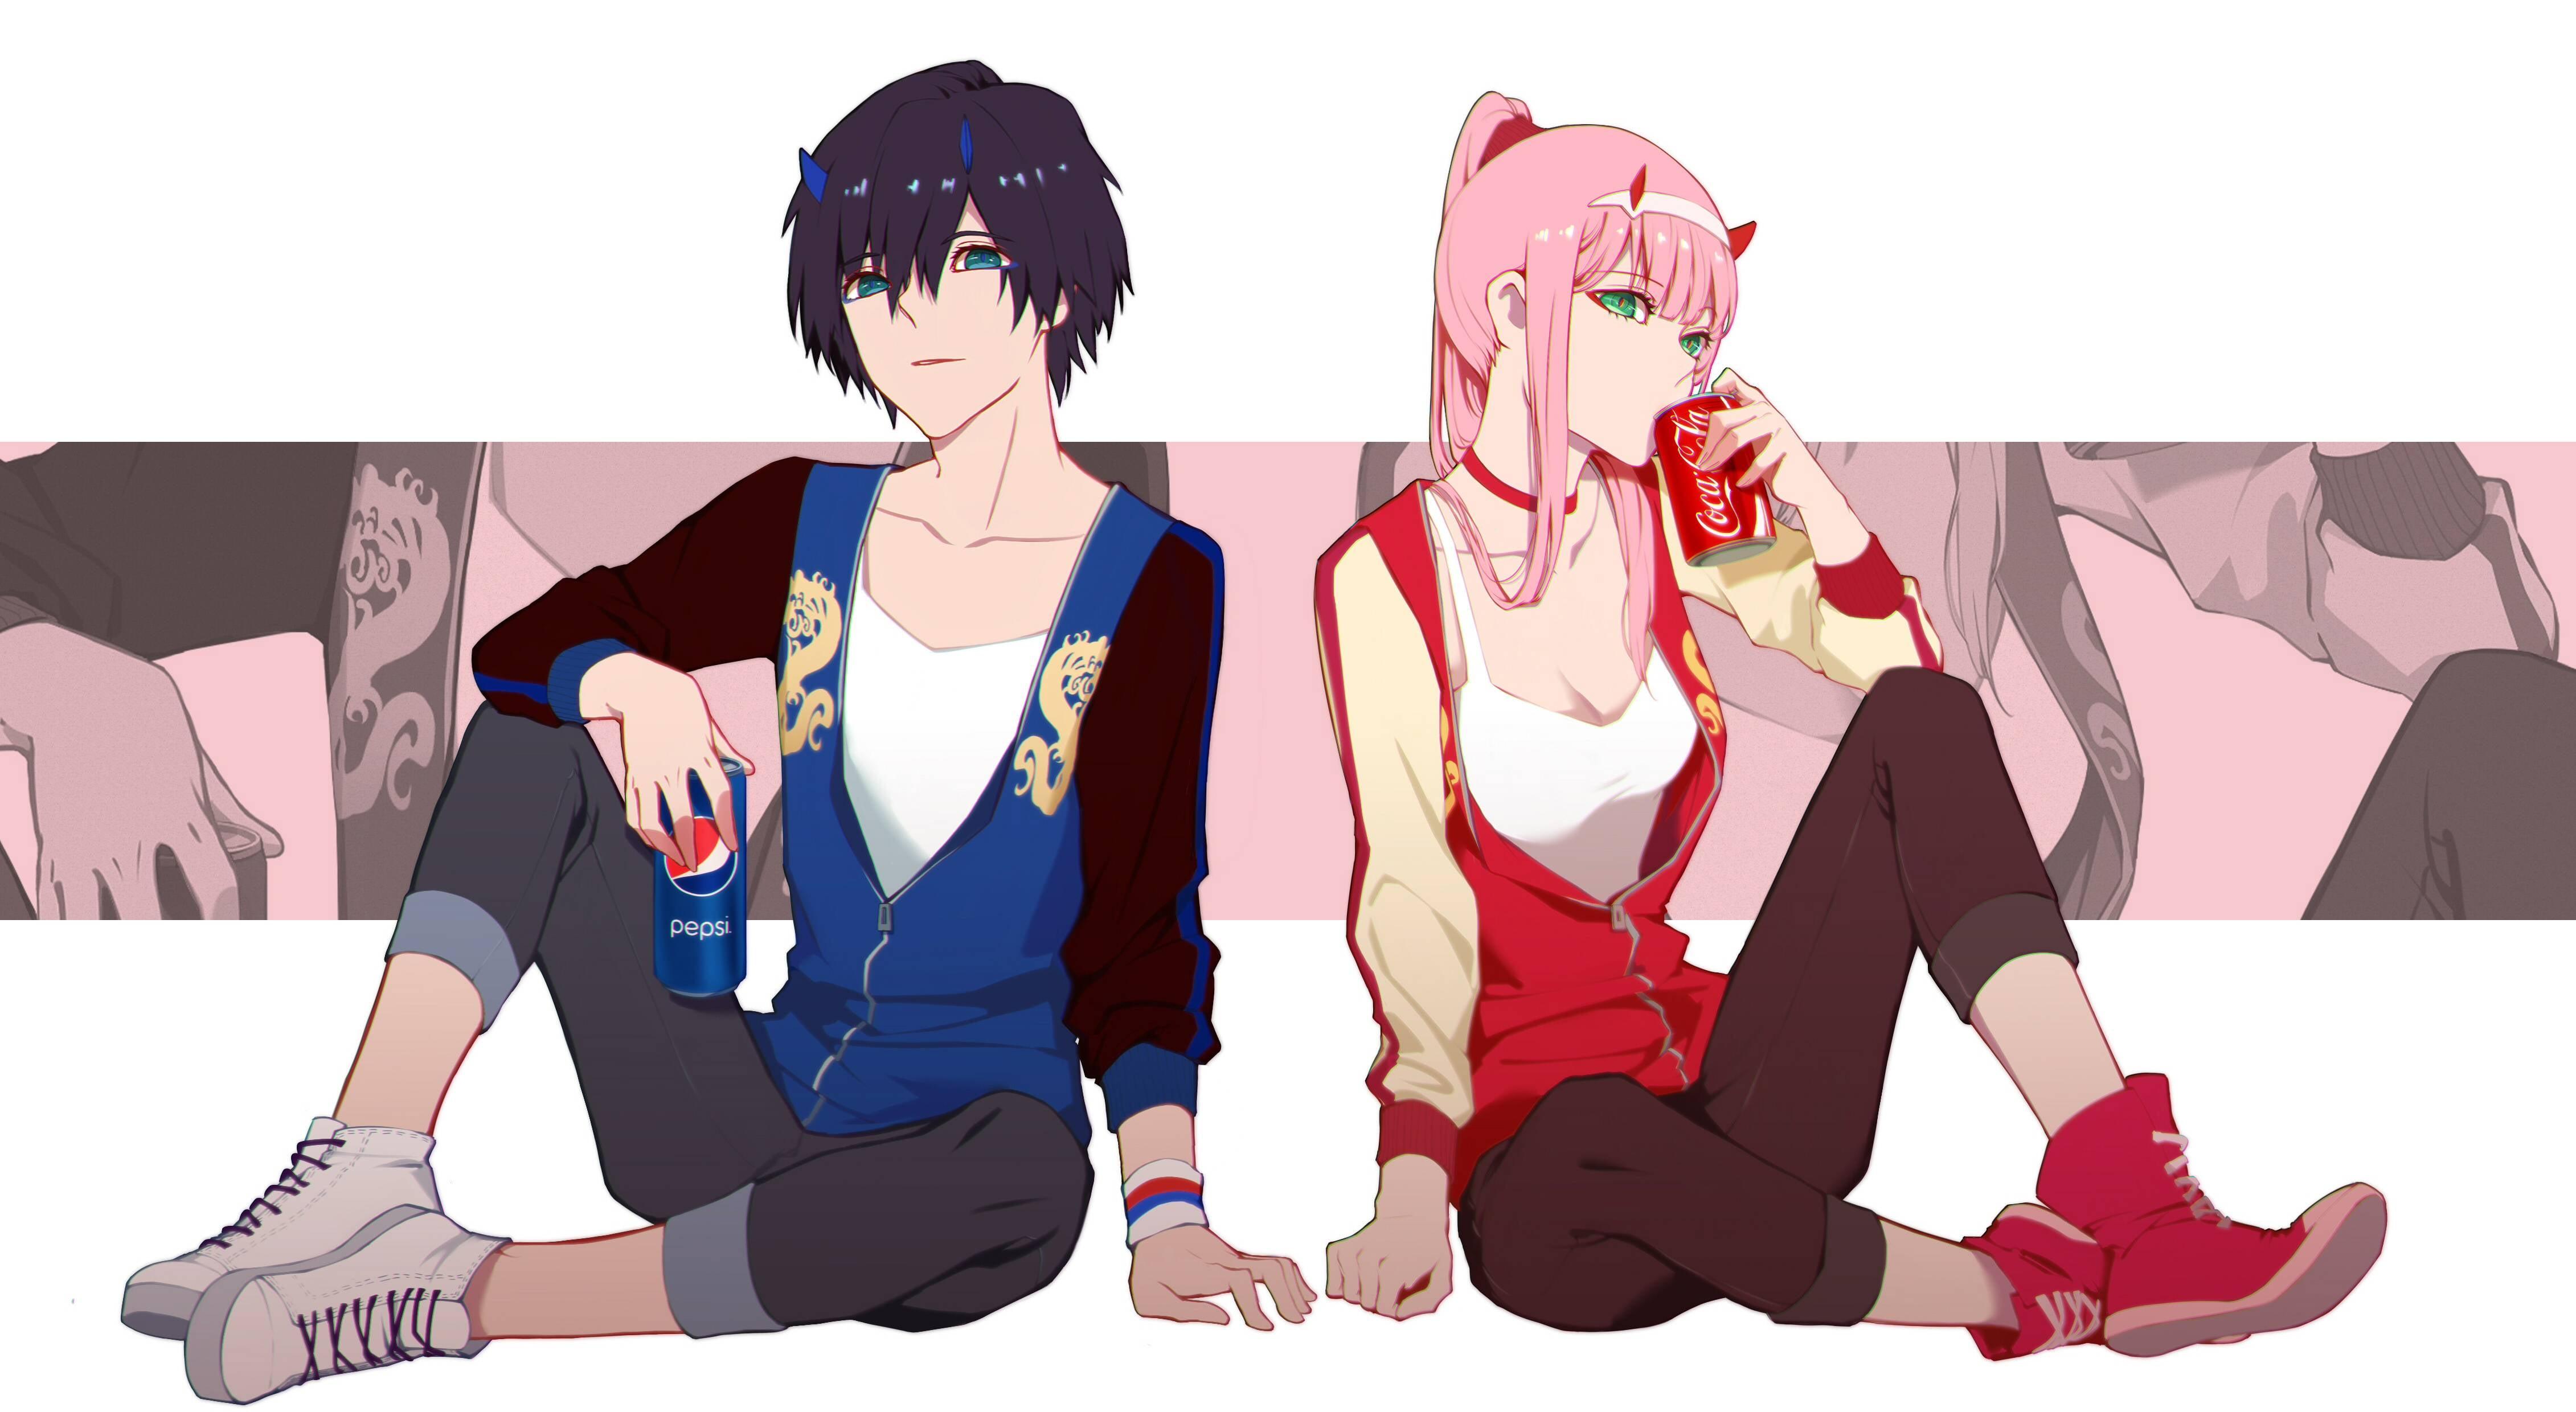 Anime Pepsi And Coca Cola Illustration, Darling In The FranXX